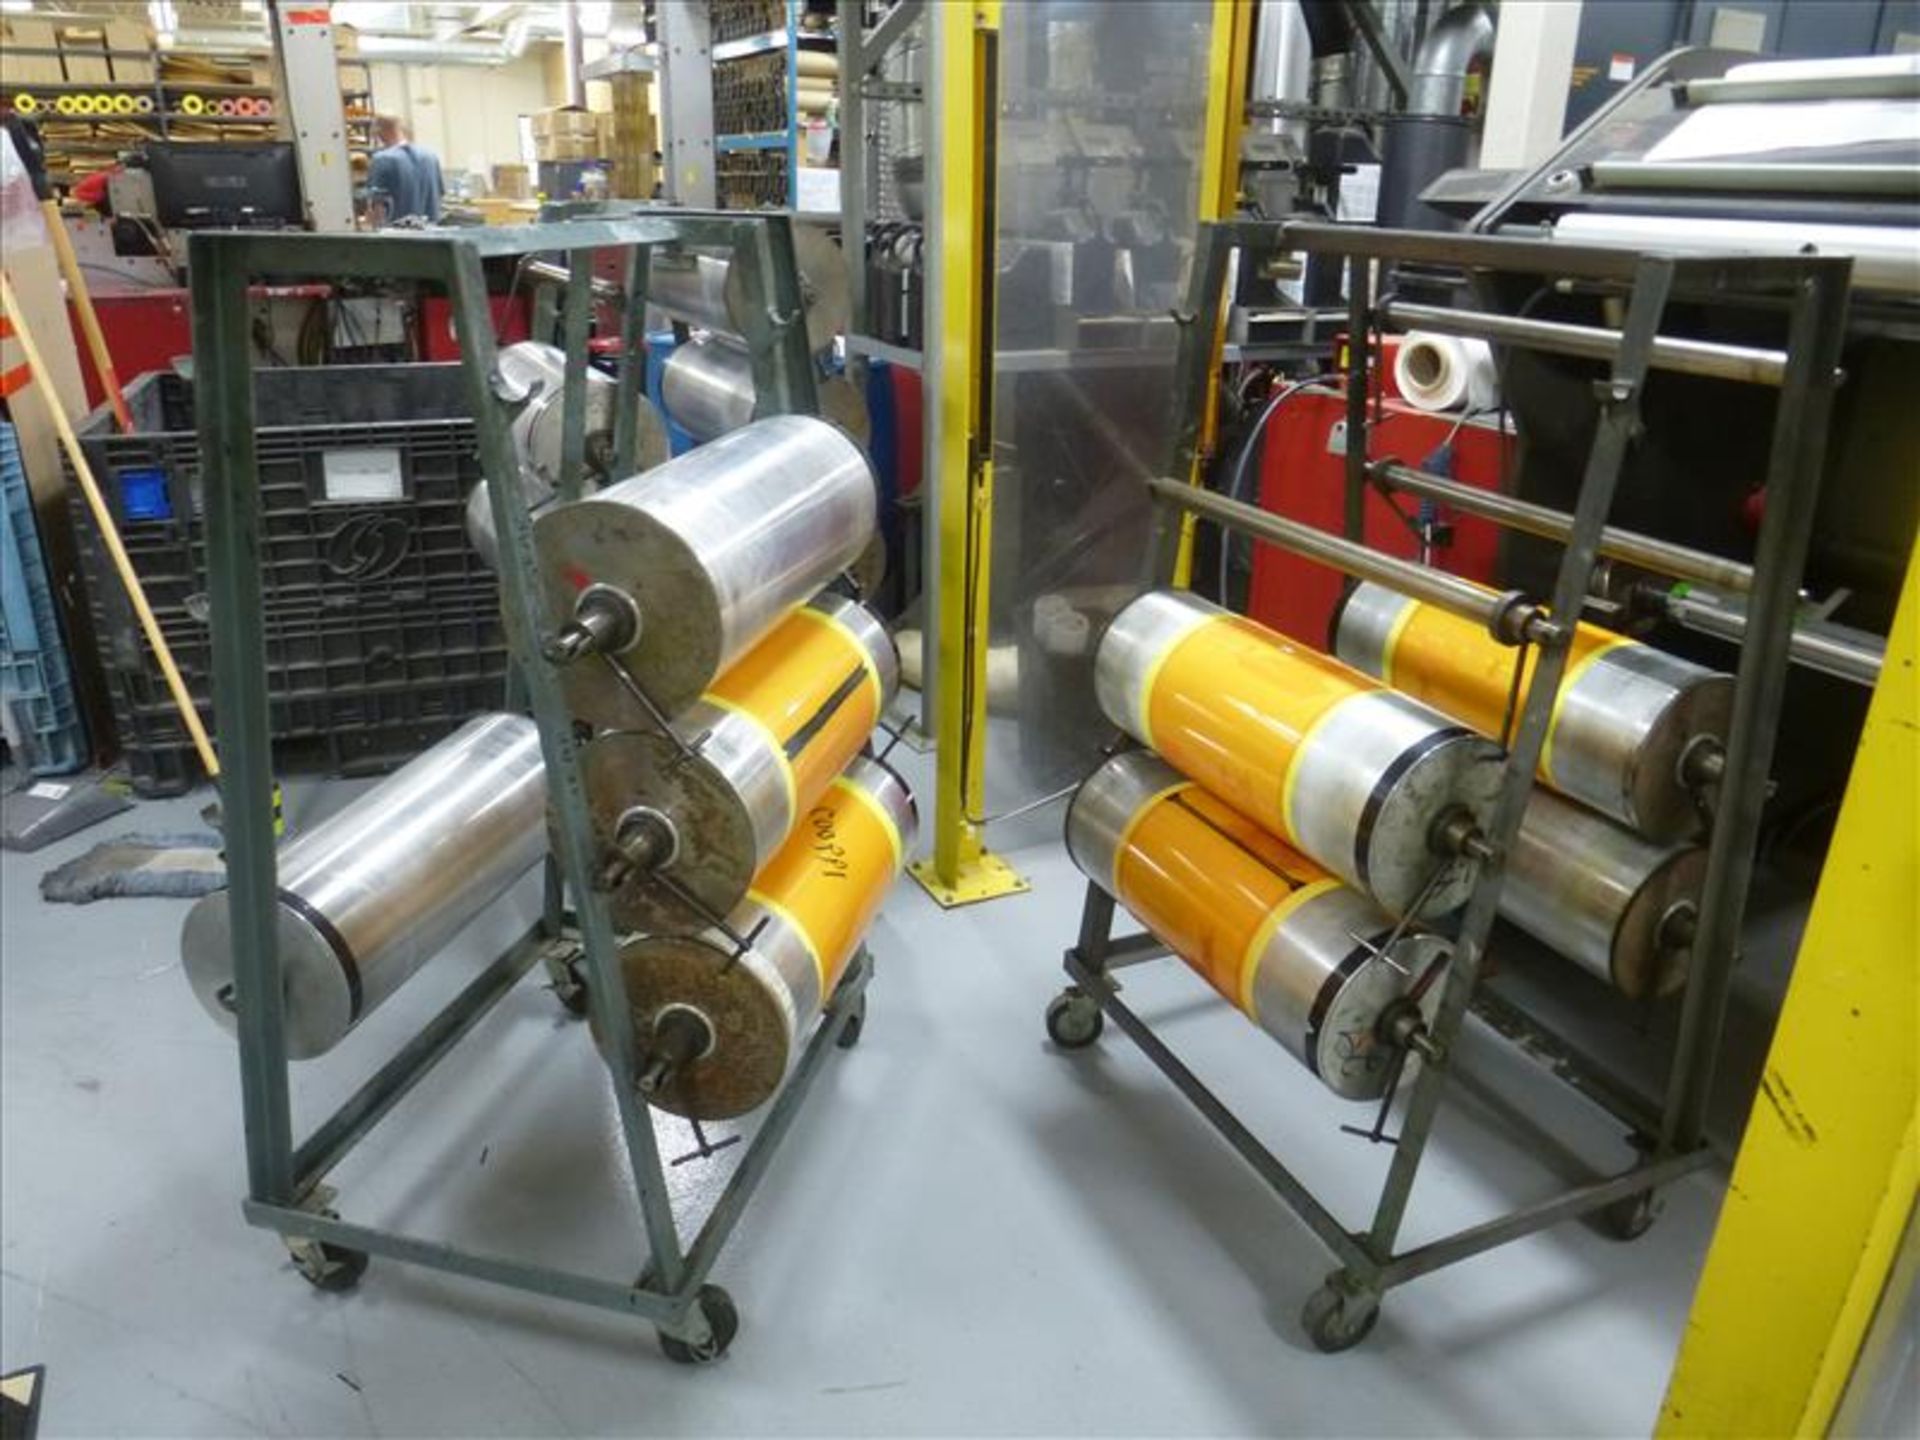 Print Cylinders for Comco Presses (Lot 2A & 2B) - See pdf for complete description.